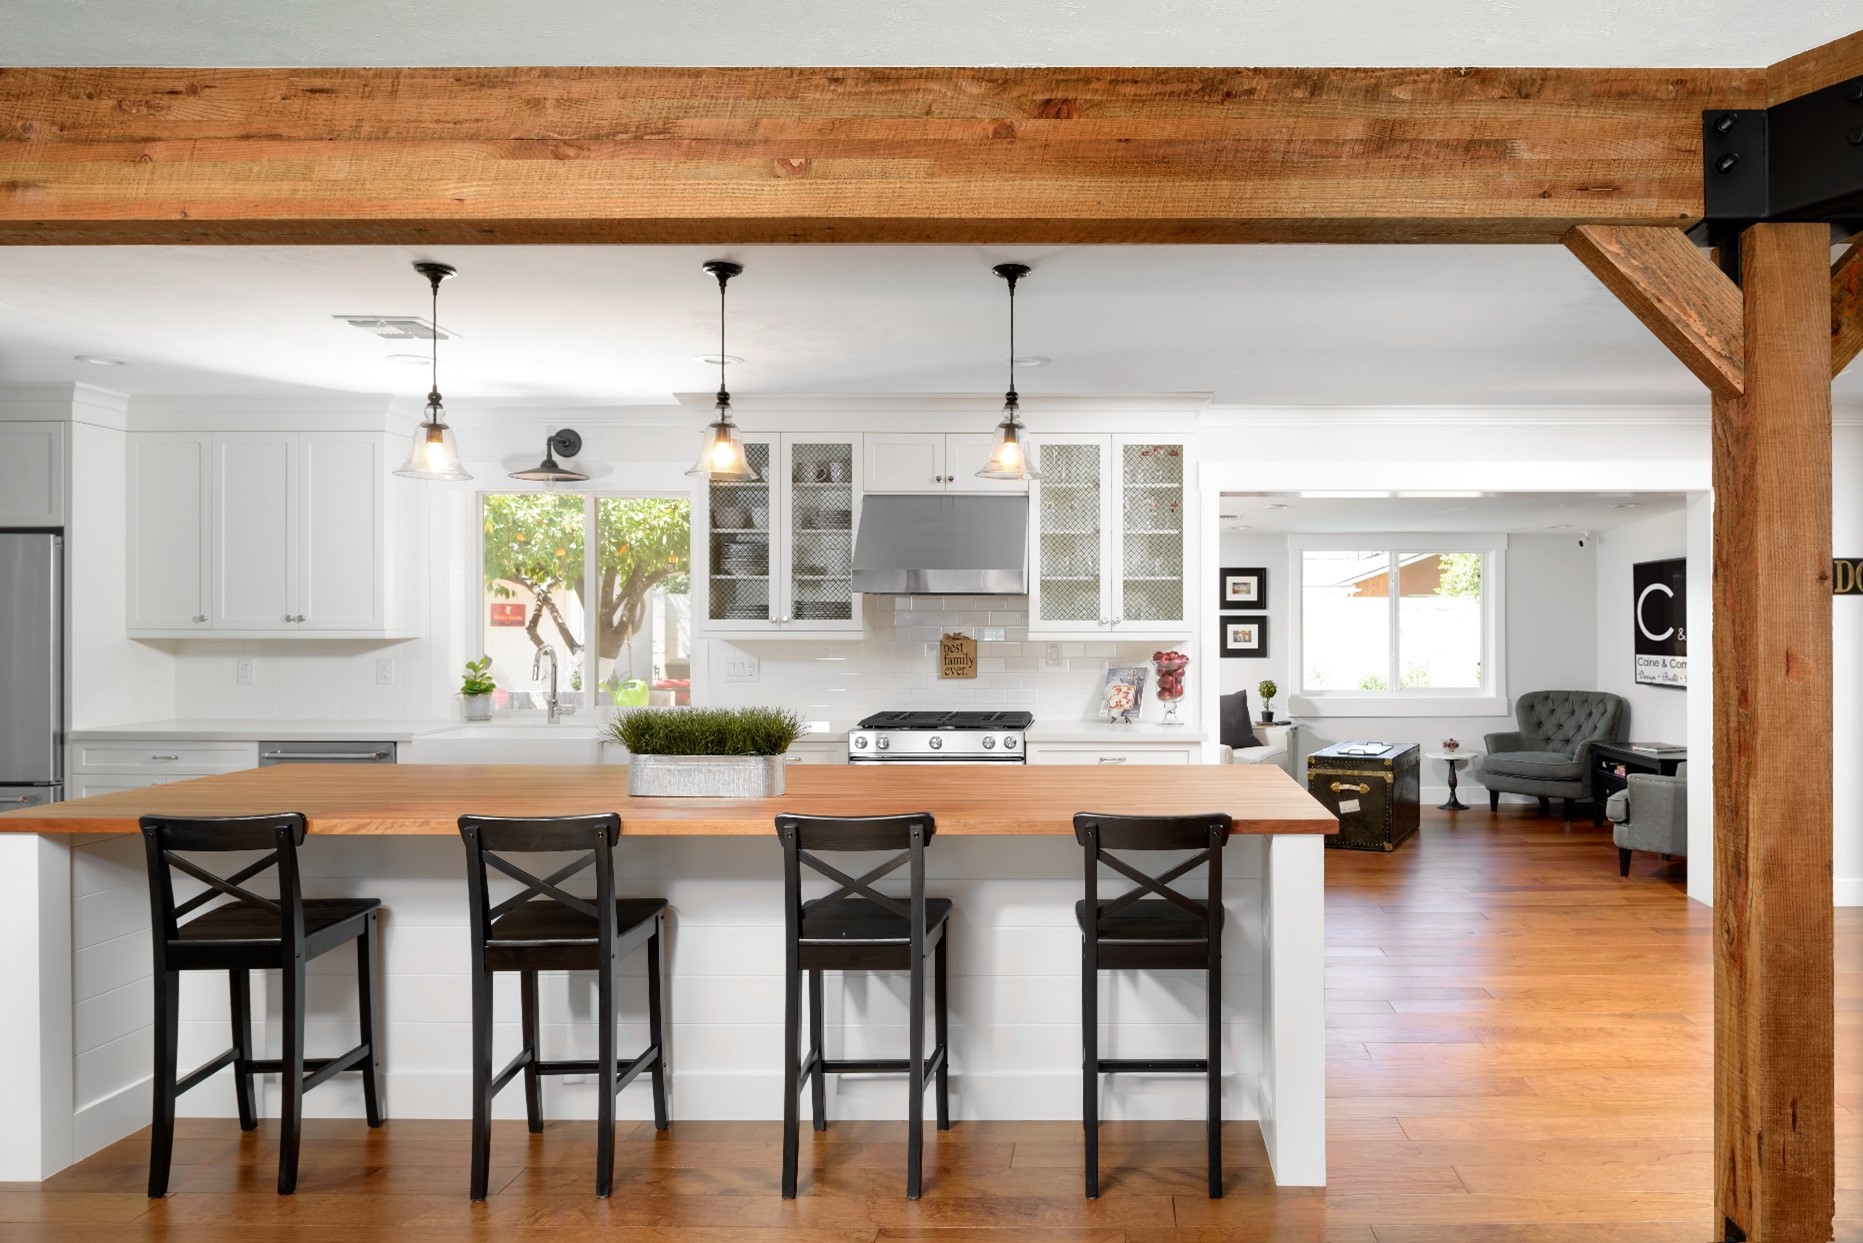 Wooden support beams and four bar stool chairs at the kitchen